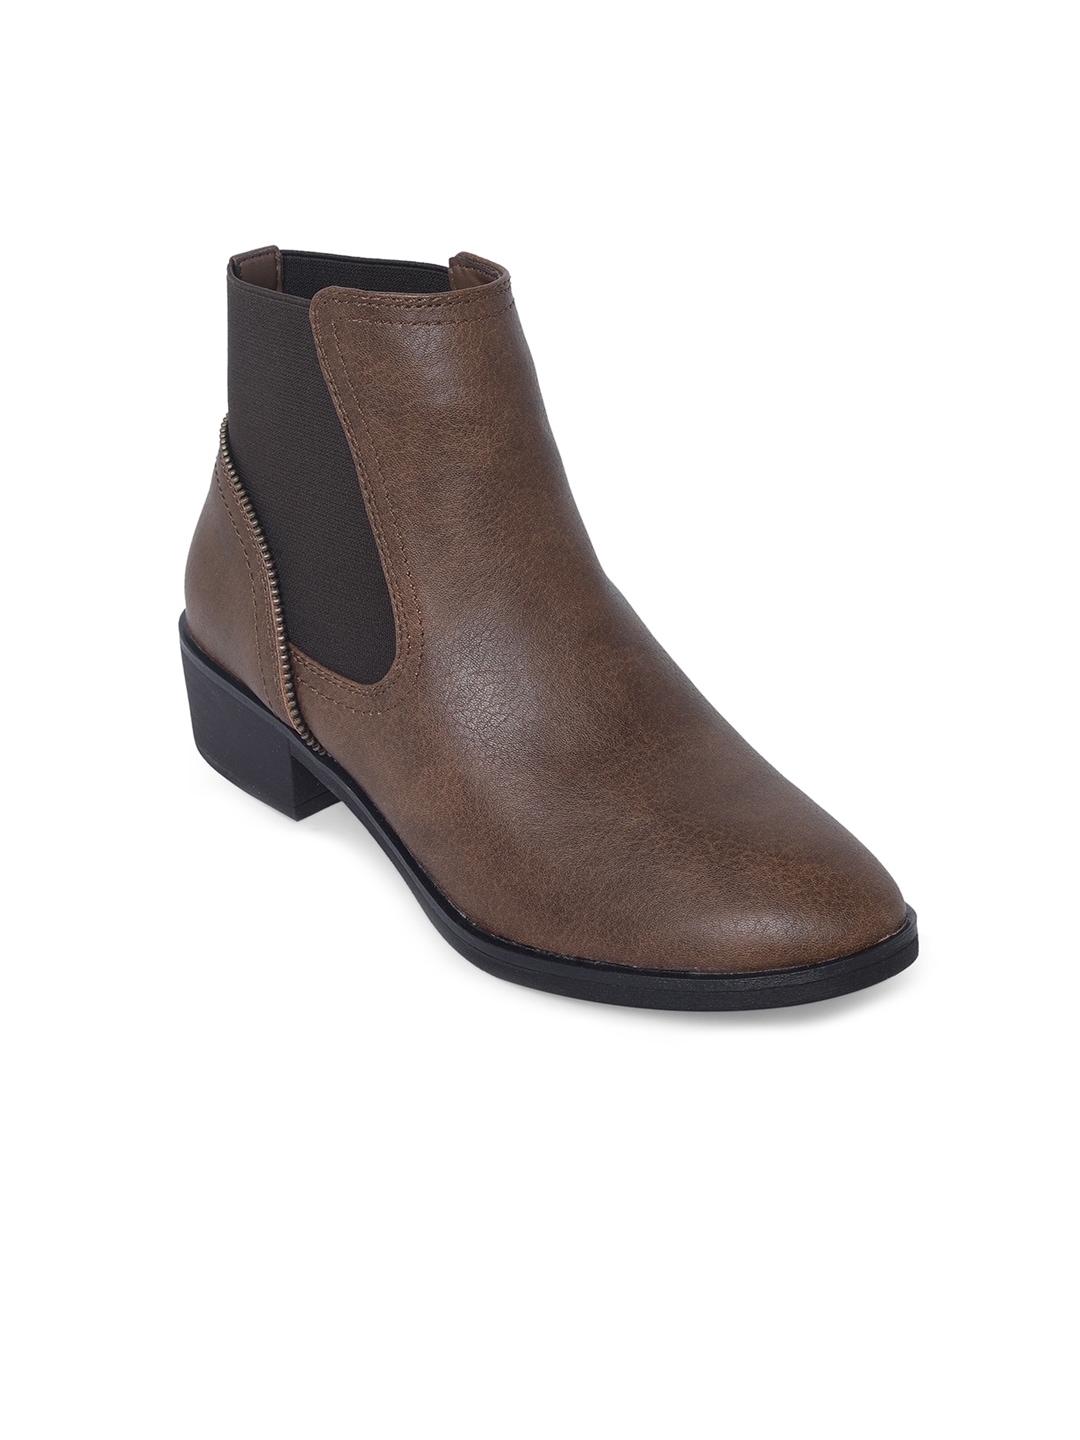 Call It Spring Women Brown High-Top Flat Boots Price in India